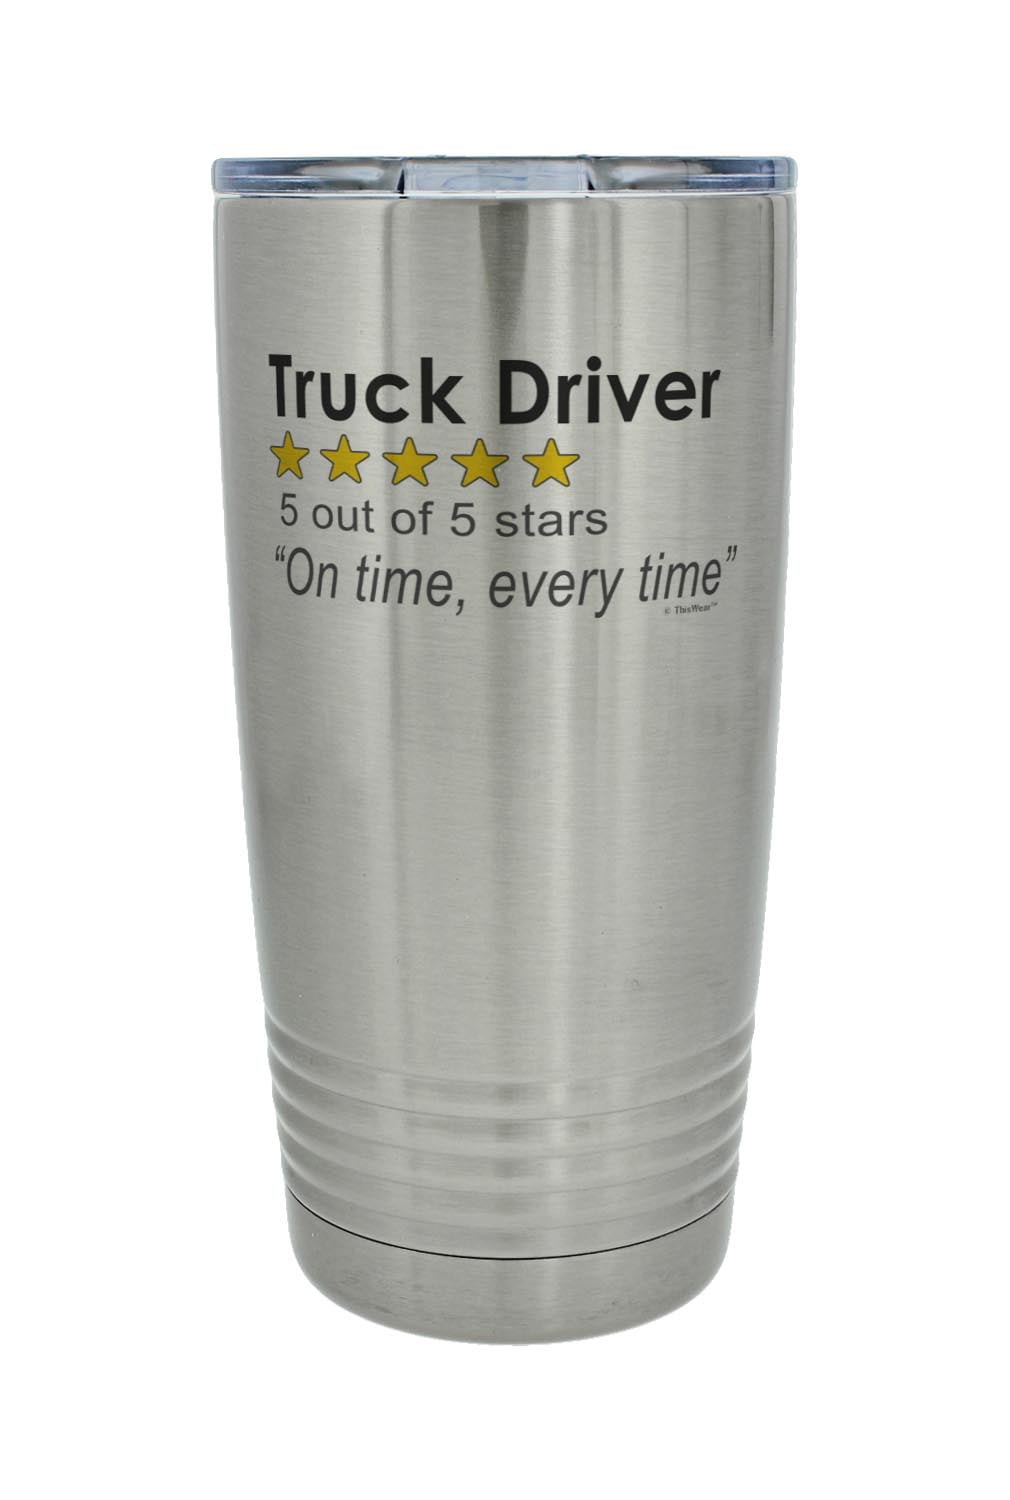 37 Expertly-Chosen Gifts For Truck Drivers That Will Go The Extra Mile